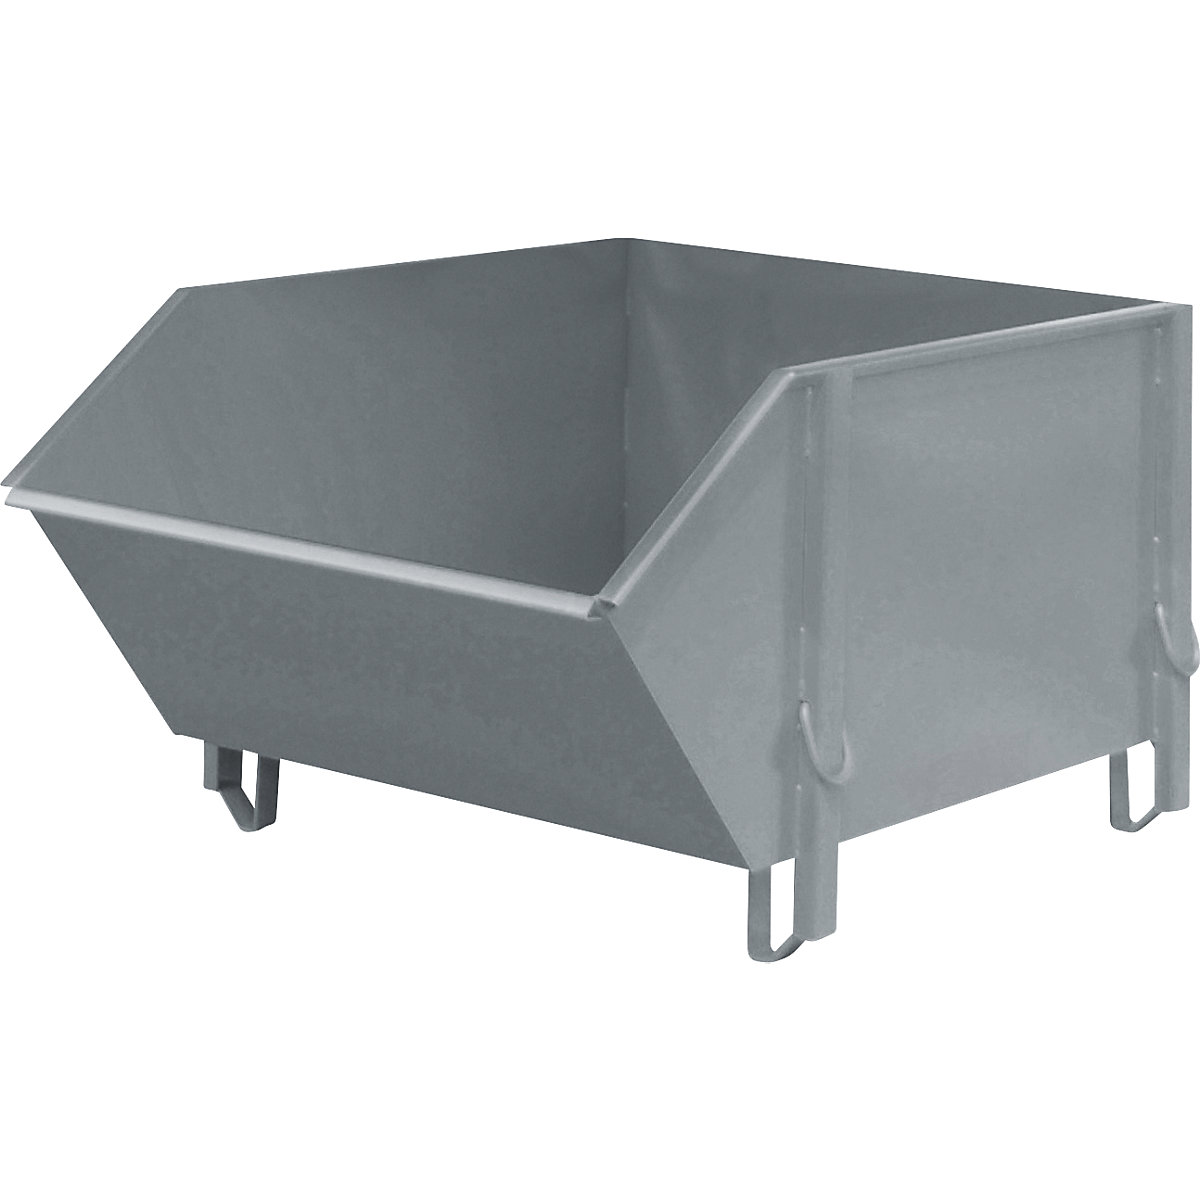 Sheet steel container – eurokraft pro, capacity 1 m³, without folding chute, mouse grey-6